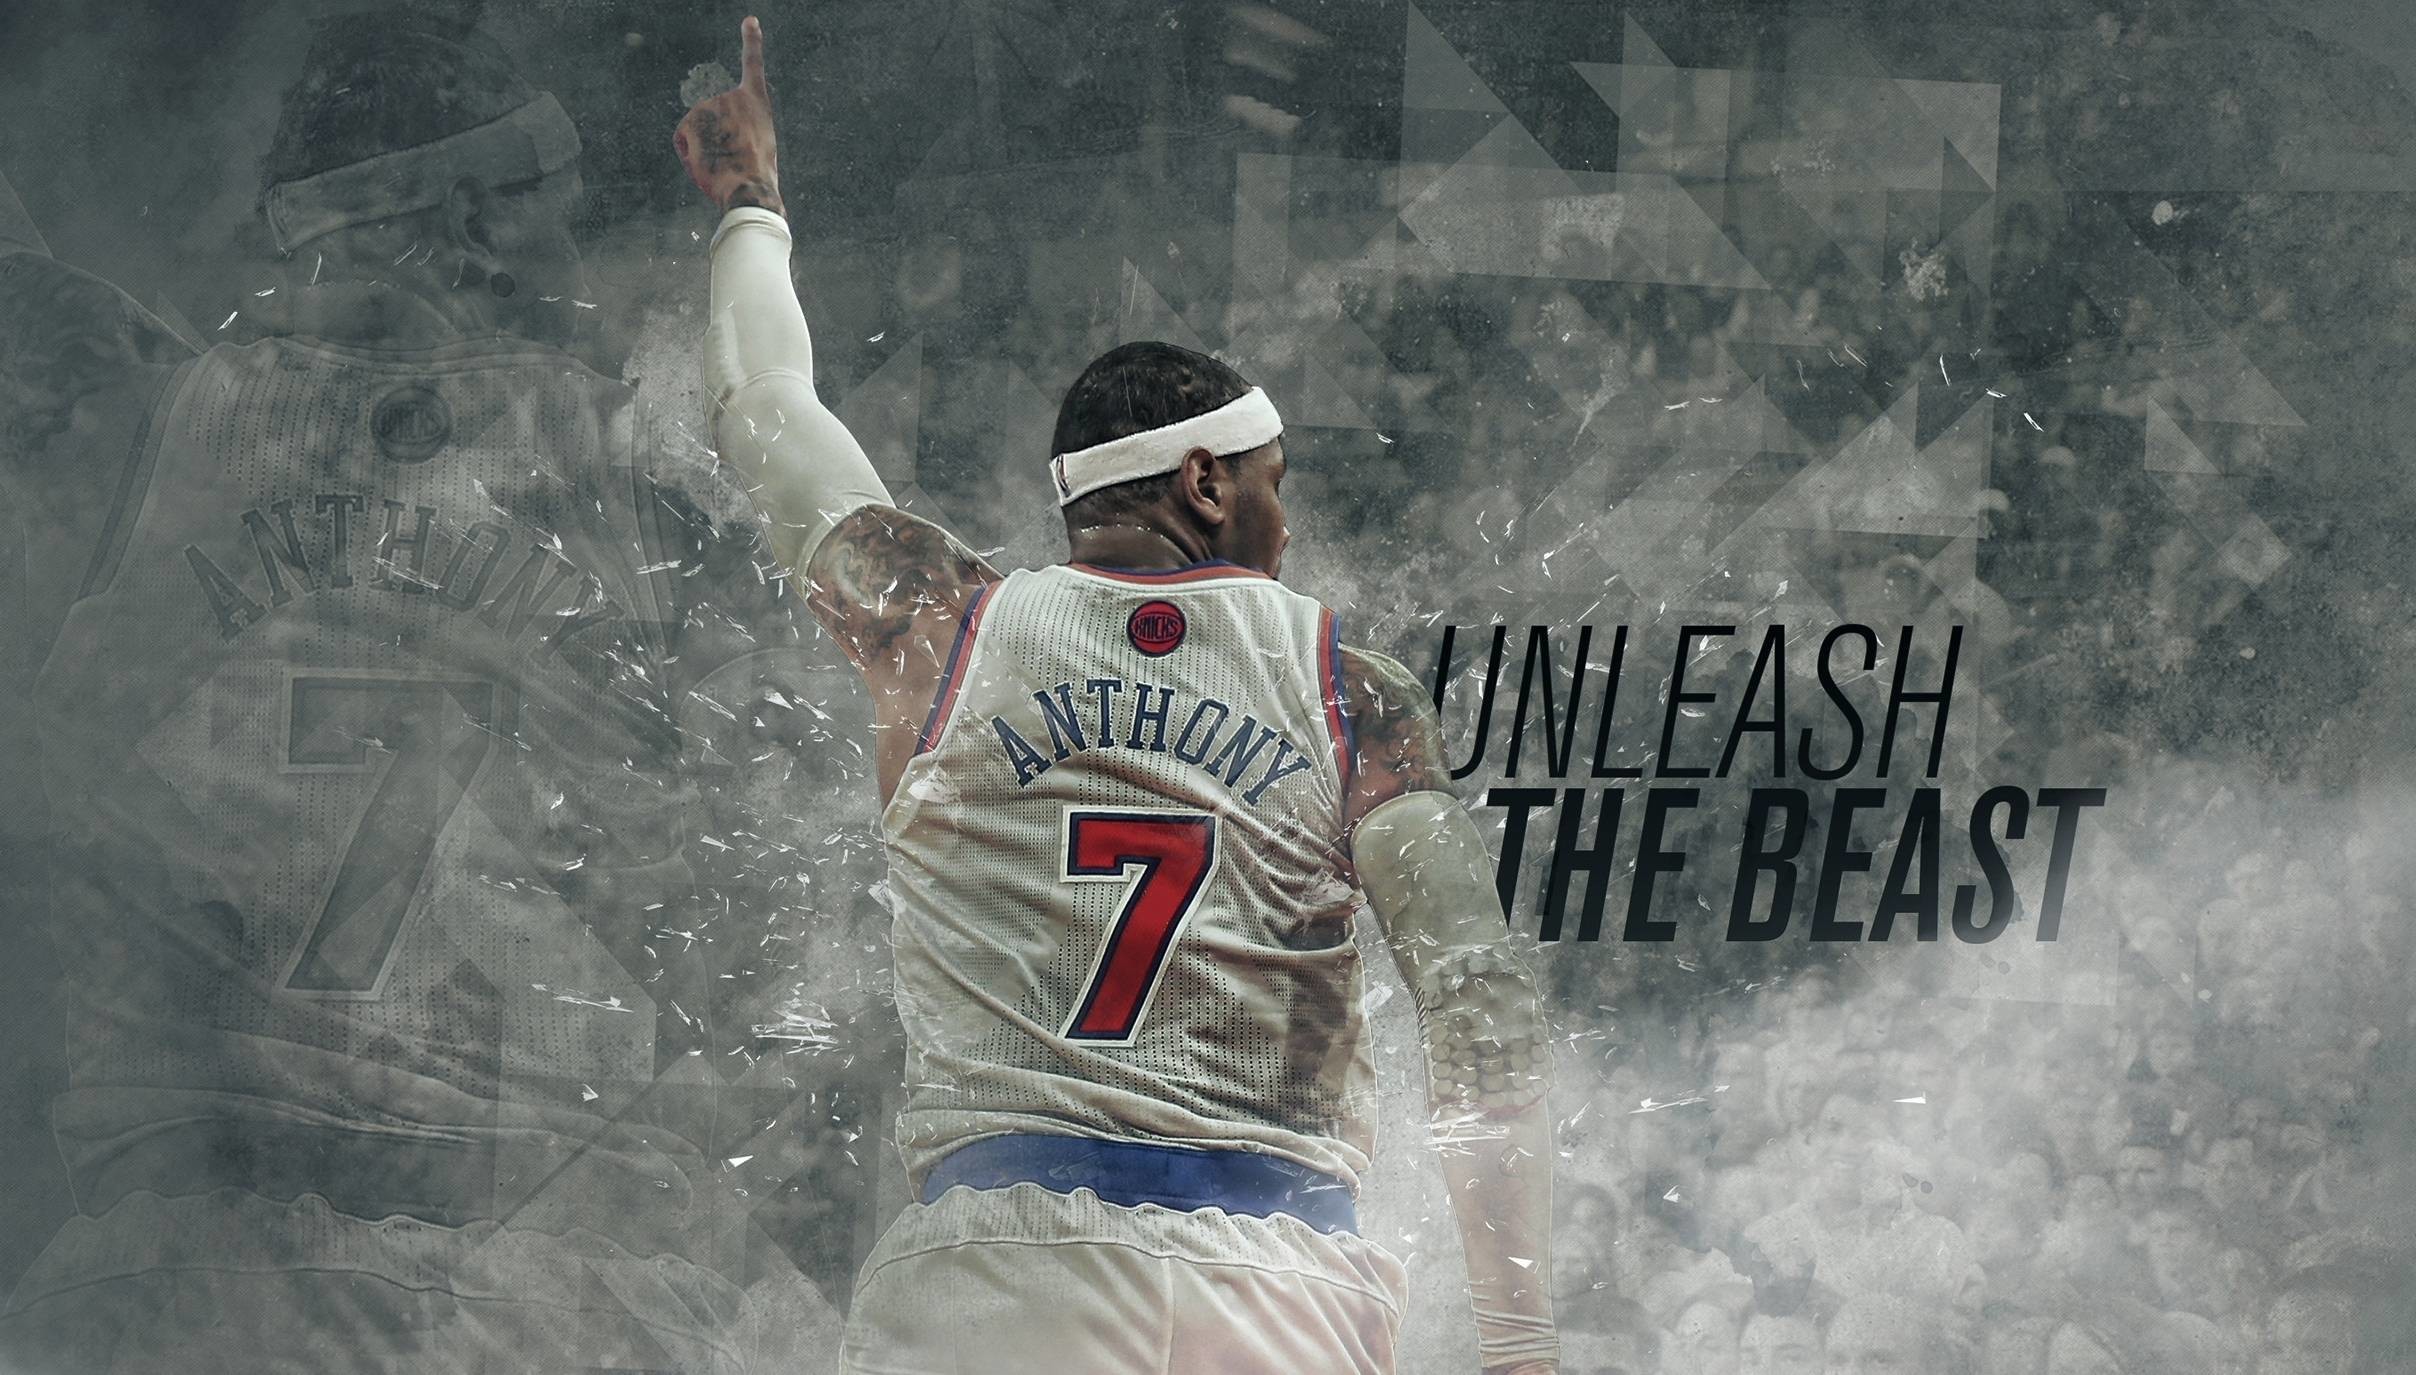 2416x1375 Wallpaper carmelo, anthony, nba wallpapers sports - download